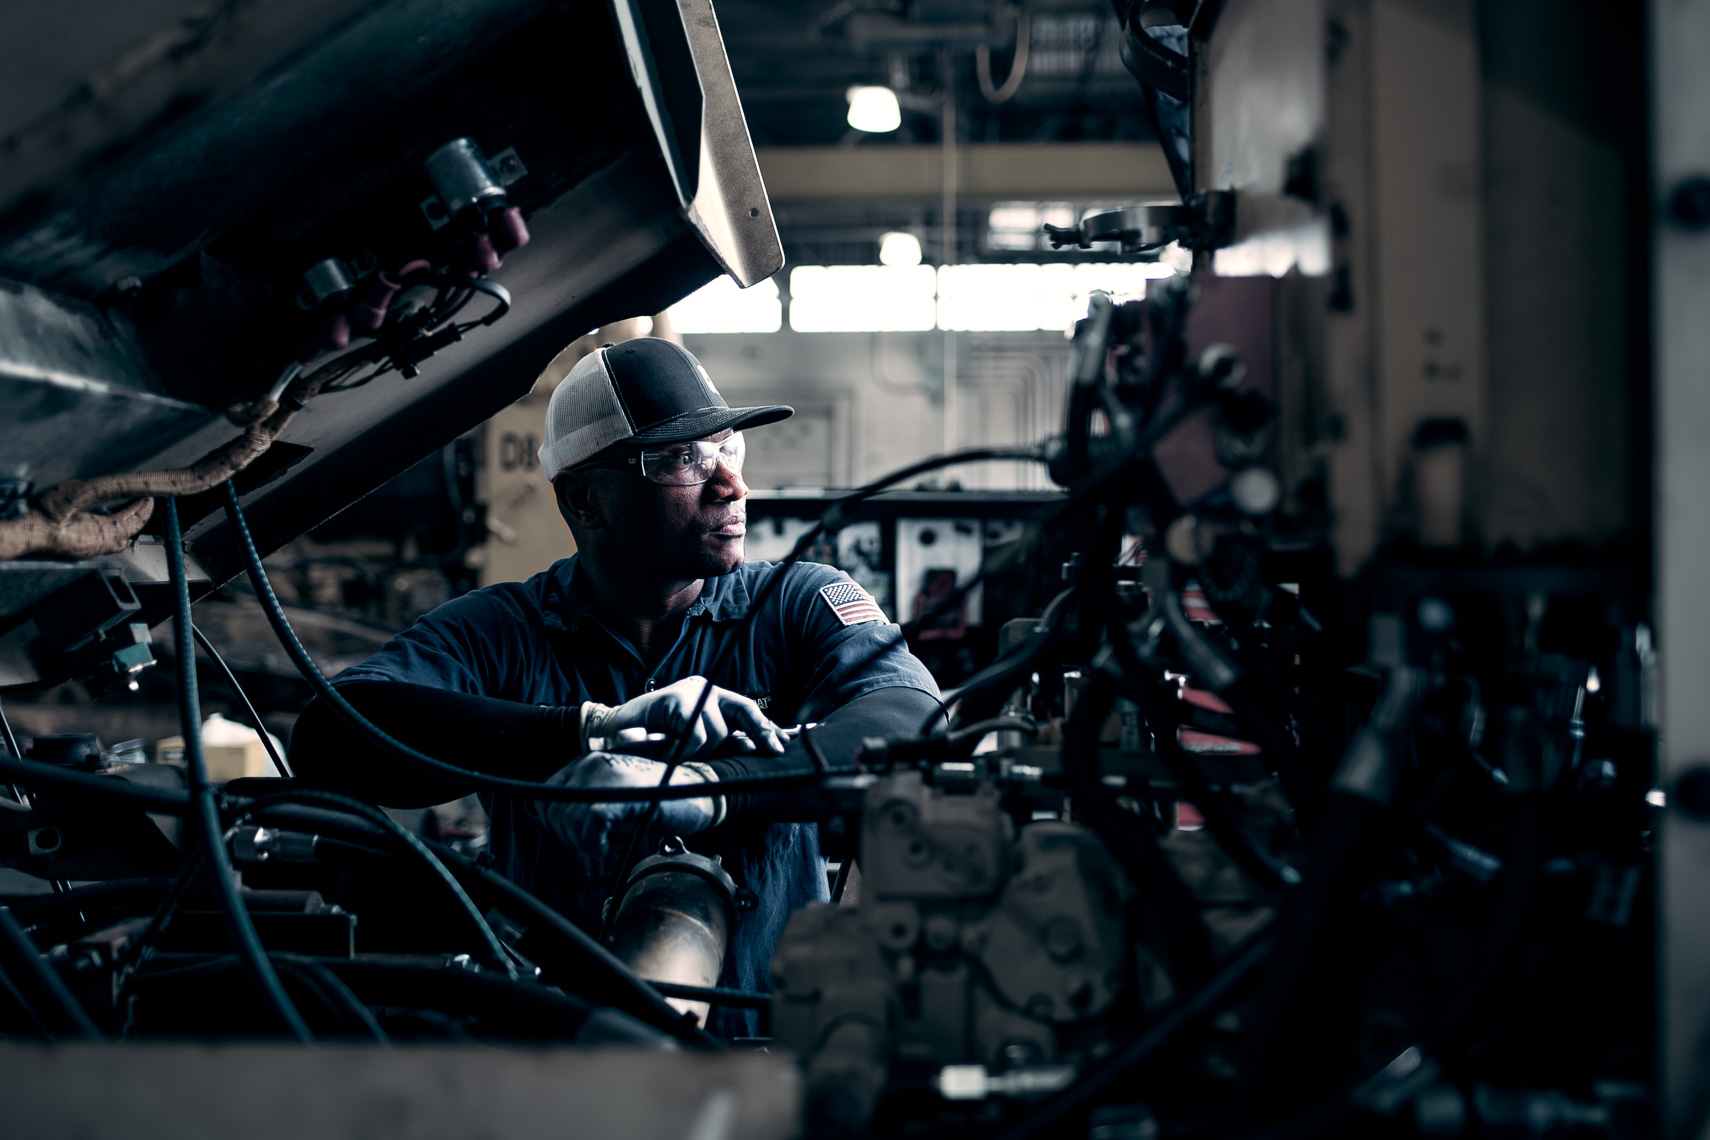 Service_Technicians_for_Gregory_Poole_20190904_photo_by_Justin_Kase_Conder_1981-Edit_CAT.JPG